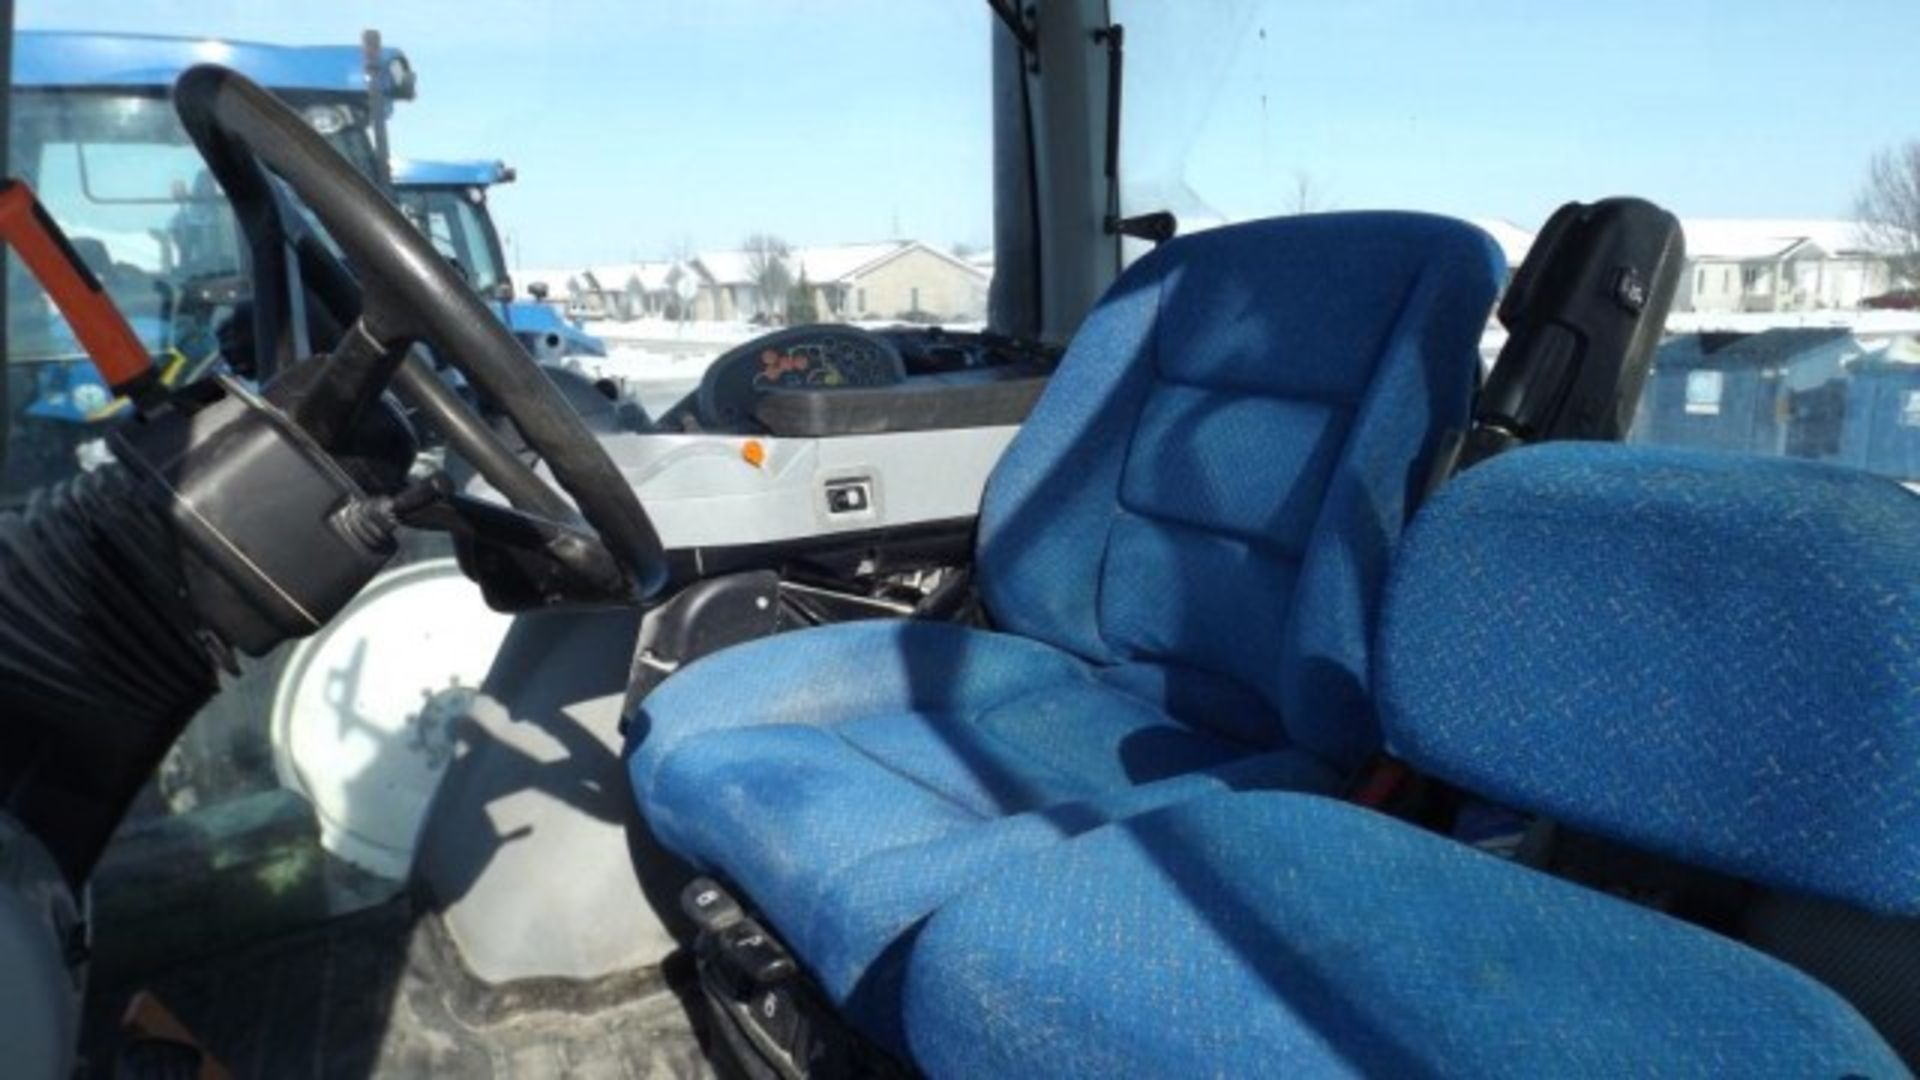 New Holland T8.275 Tractor '12, sn# ZCRC03030 6734 Hrs, MFWD, Deluxe Cab, Buddy Seat, 235 HP, 18/ - Image 14 of 20